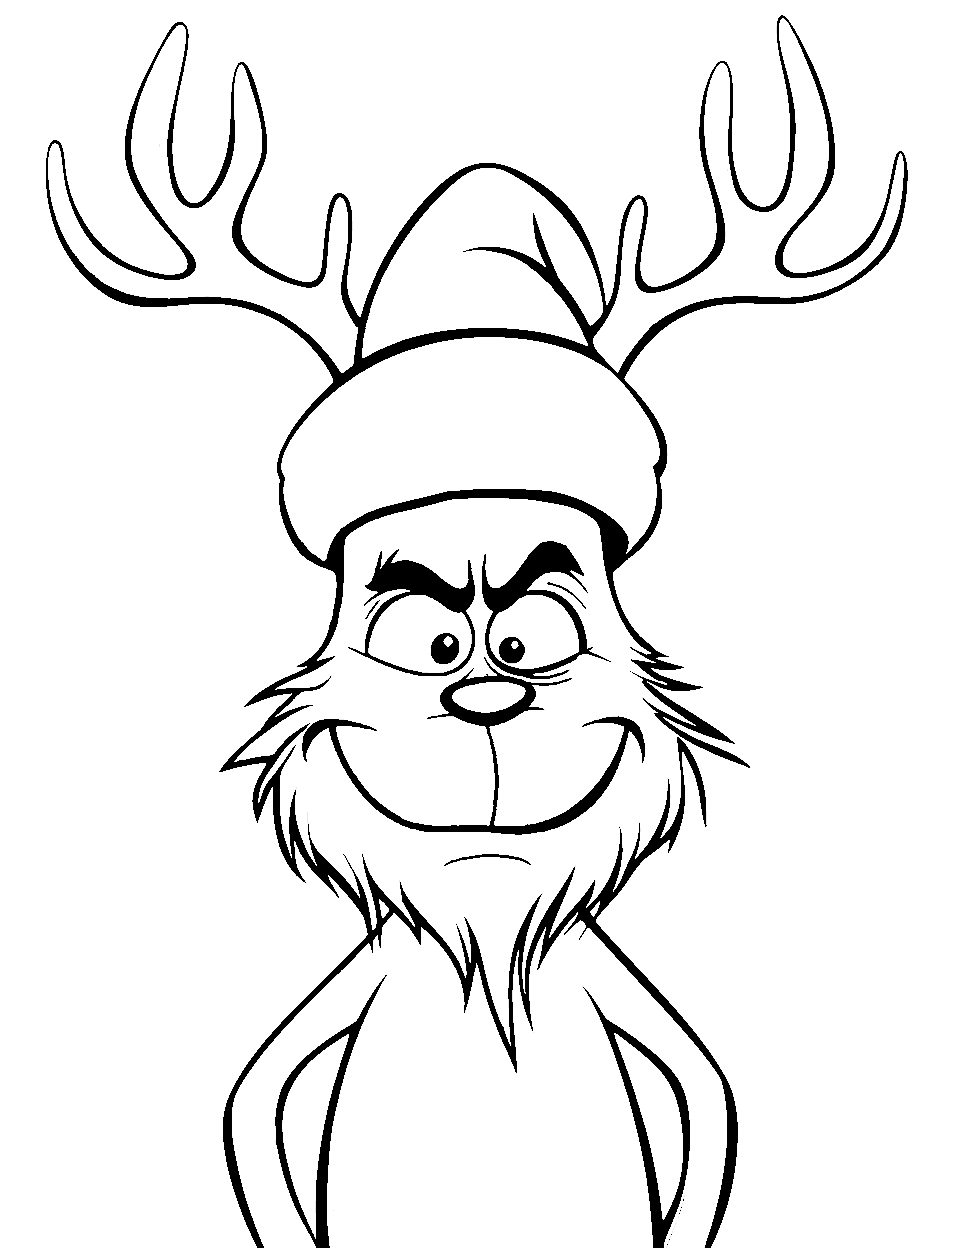 Grinch Wearing Reindeer Hat Coloring Page - The Grinch is wearing a hat with reindeer antlers.